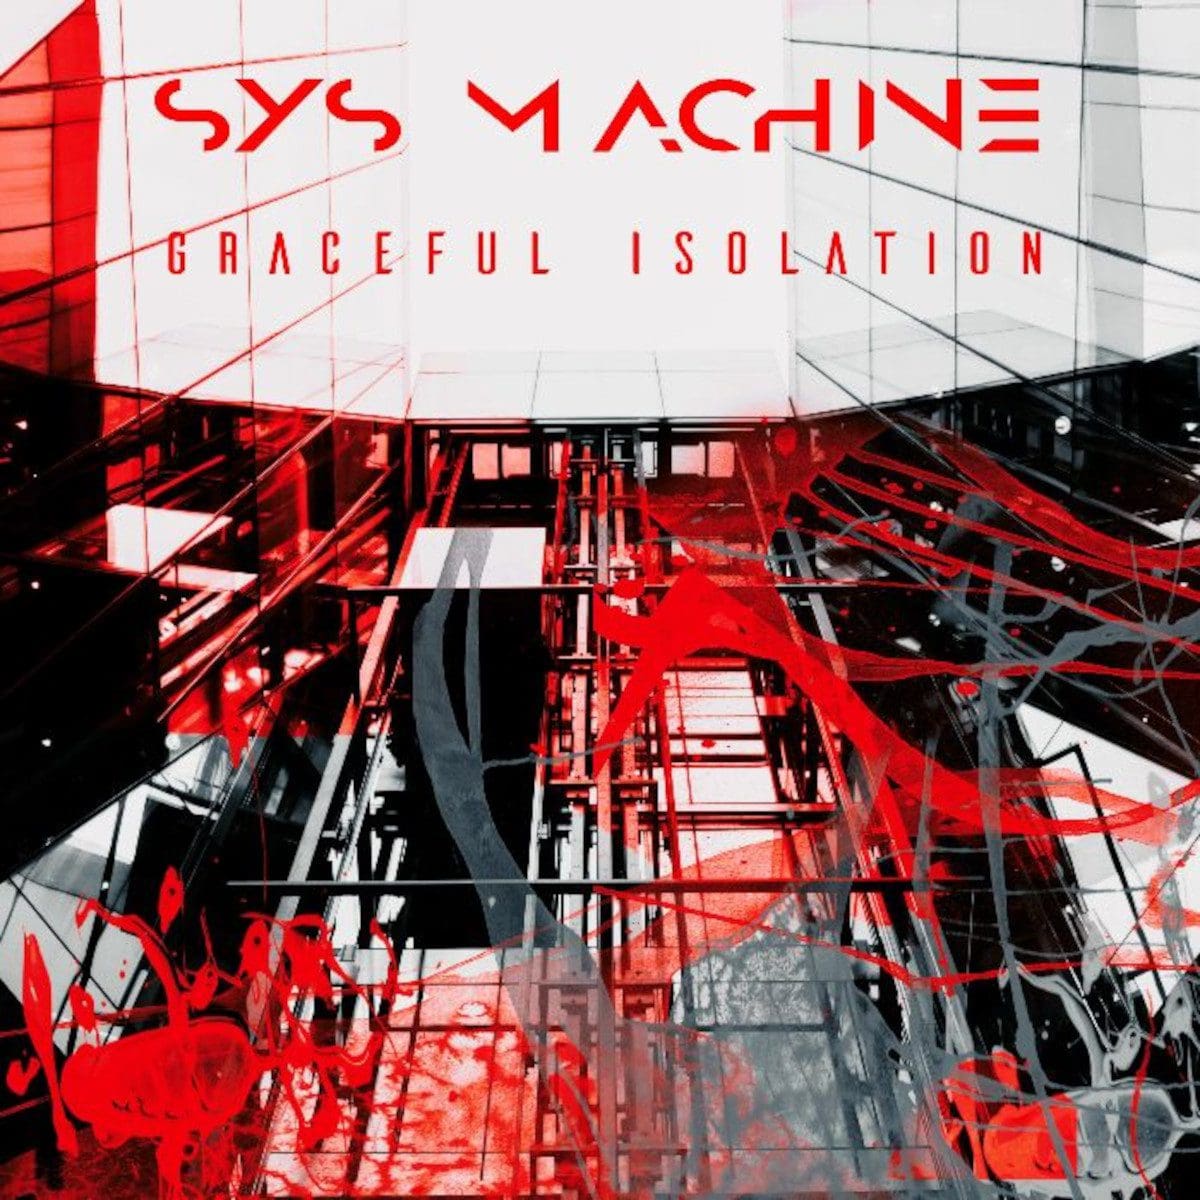 Electro-industrial act Sys Machine has just unleashed their new full-length album, 'Graceful Isolation'